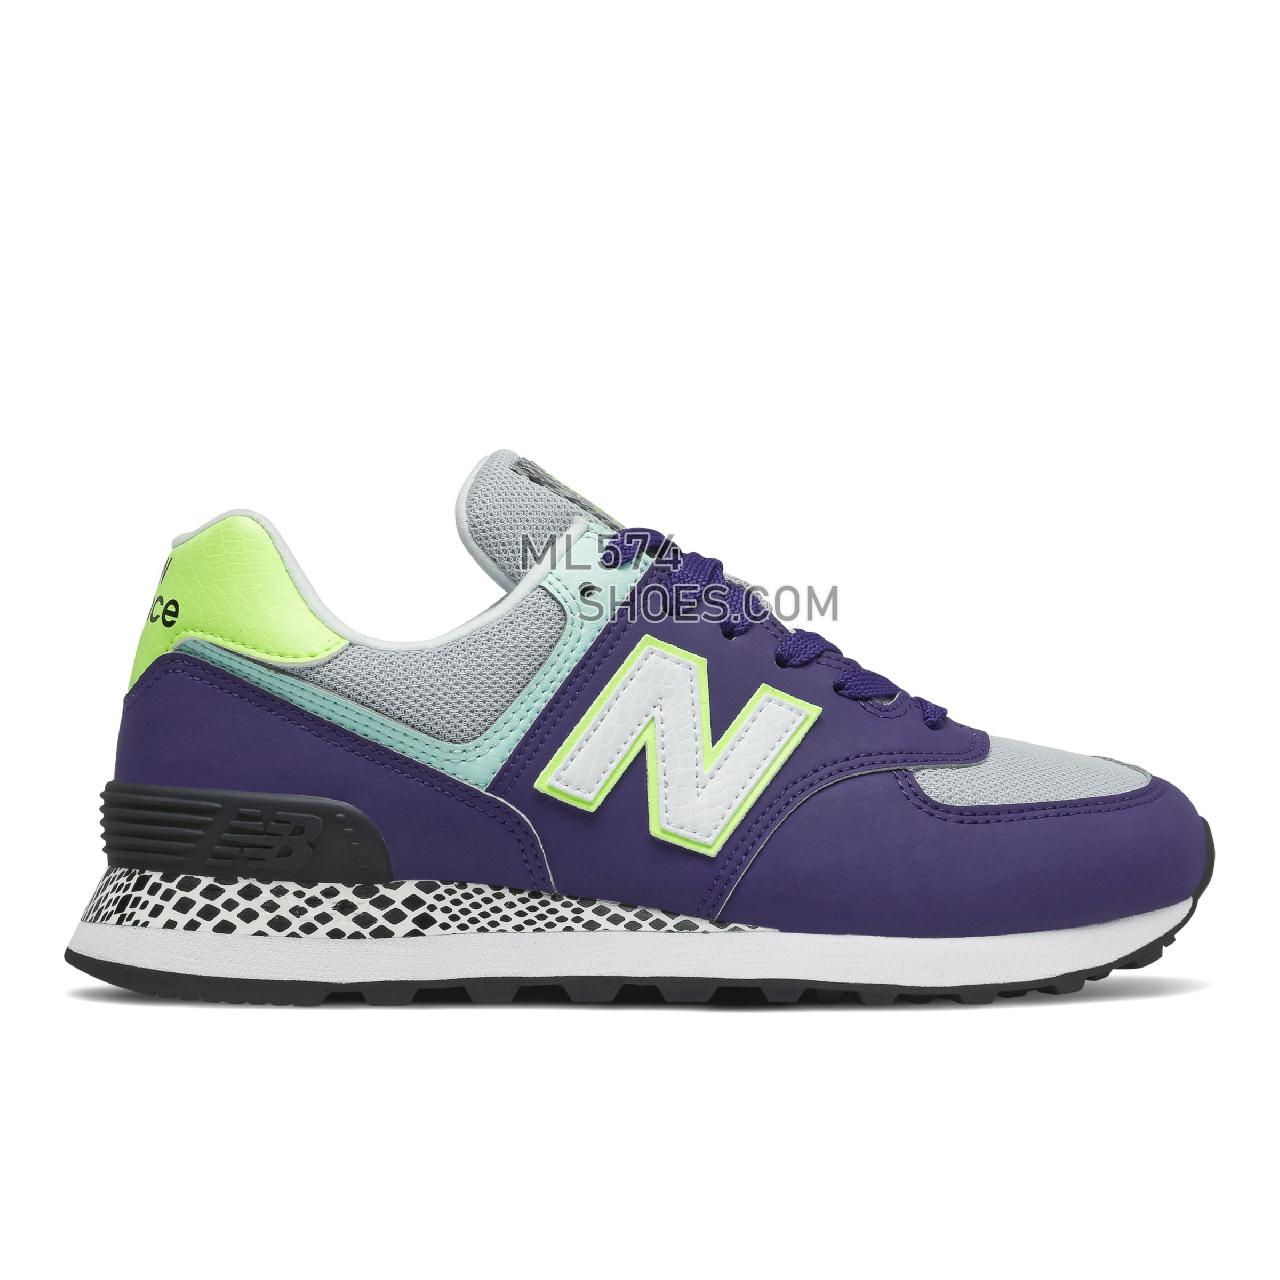 New Balance 574 - Women's Classic Sneakers - Virtual Violet with Bleached Lime Glo - WL574CT2